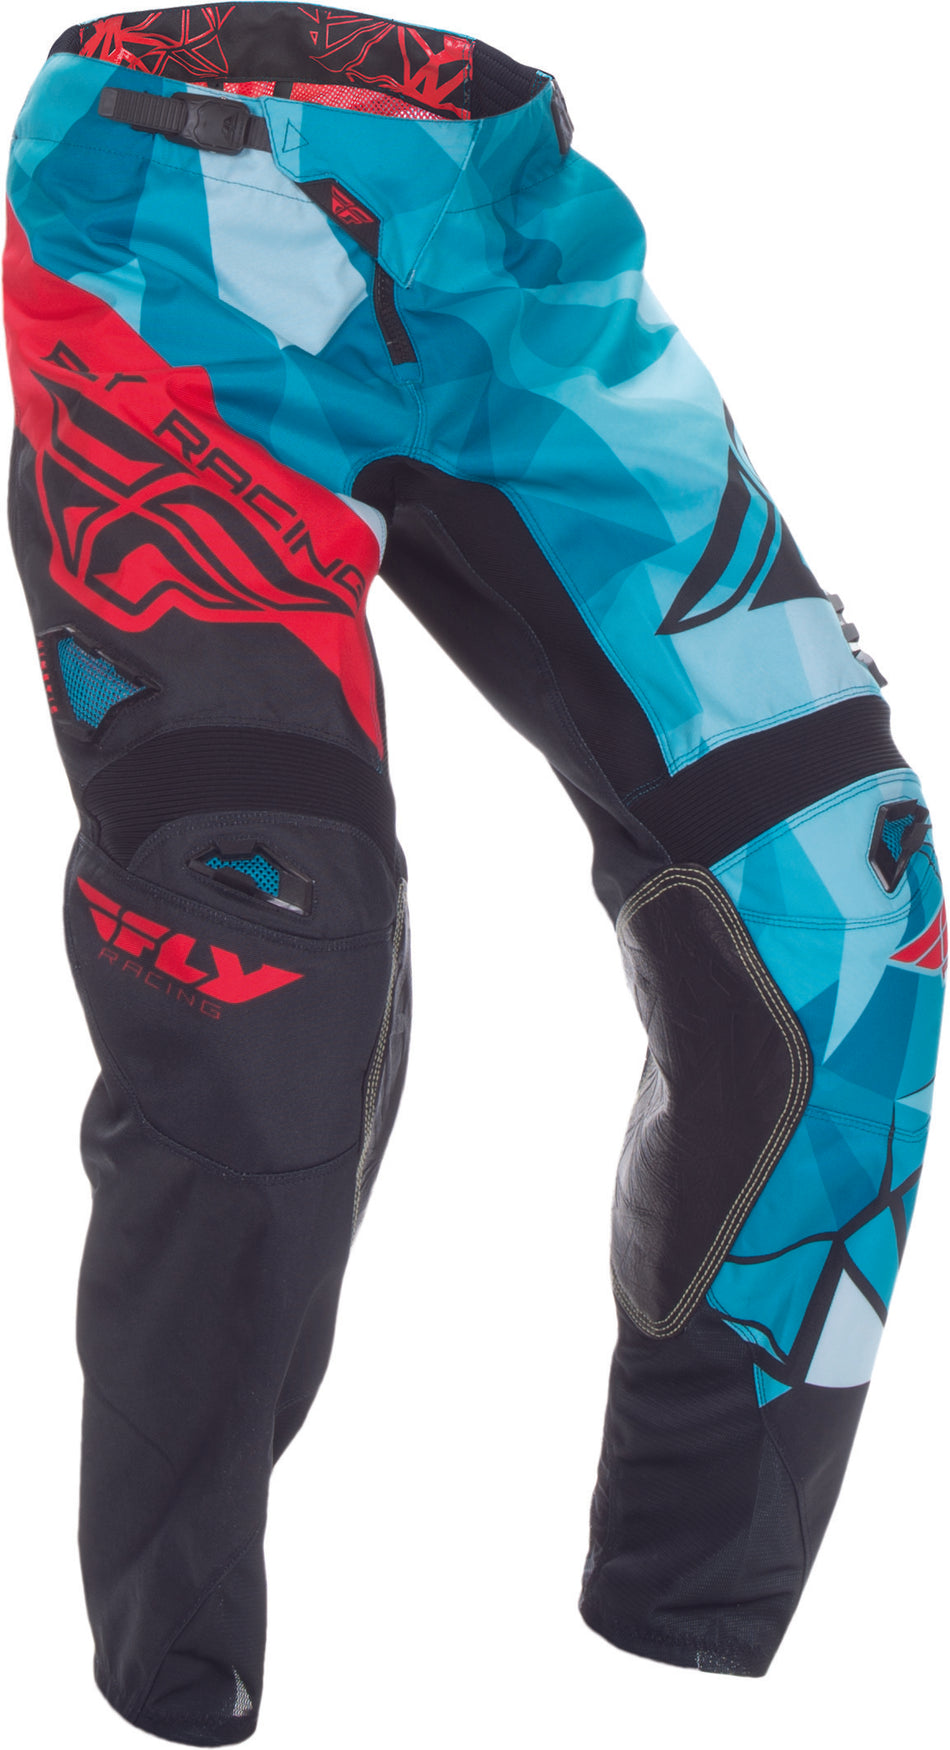 FLY RACING Kinetic Crux Pant Teal/Red Sz 36 370-53936